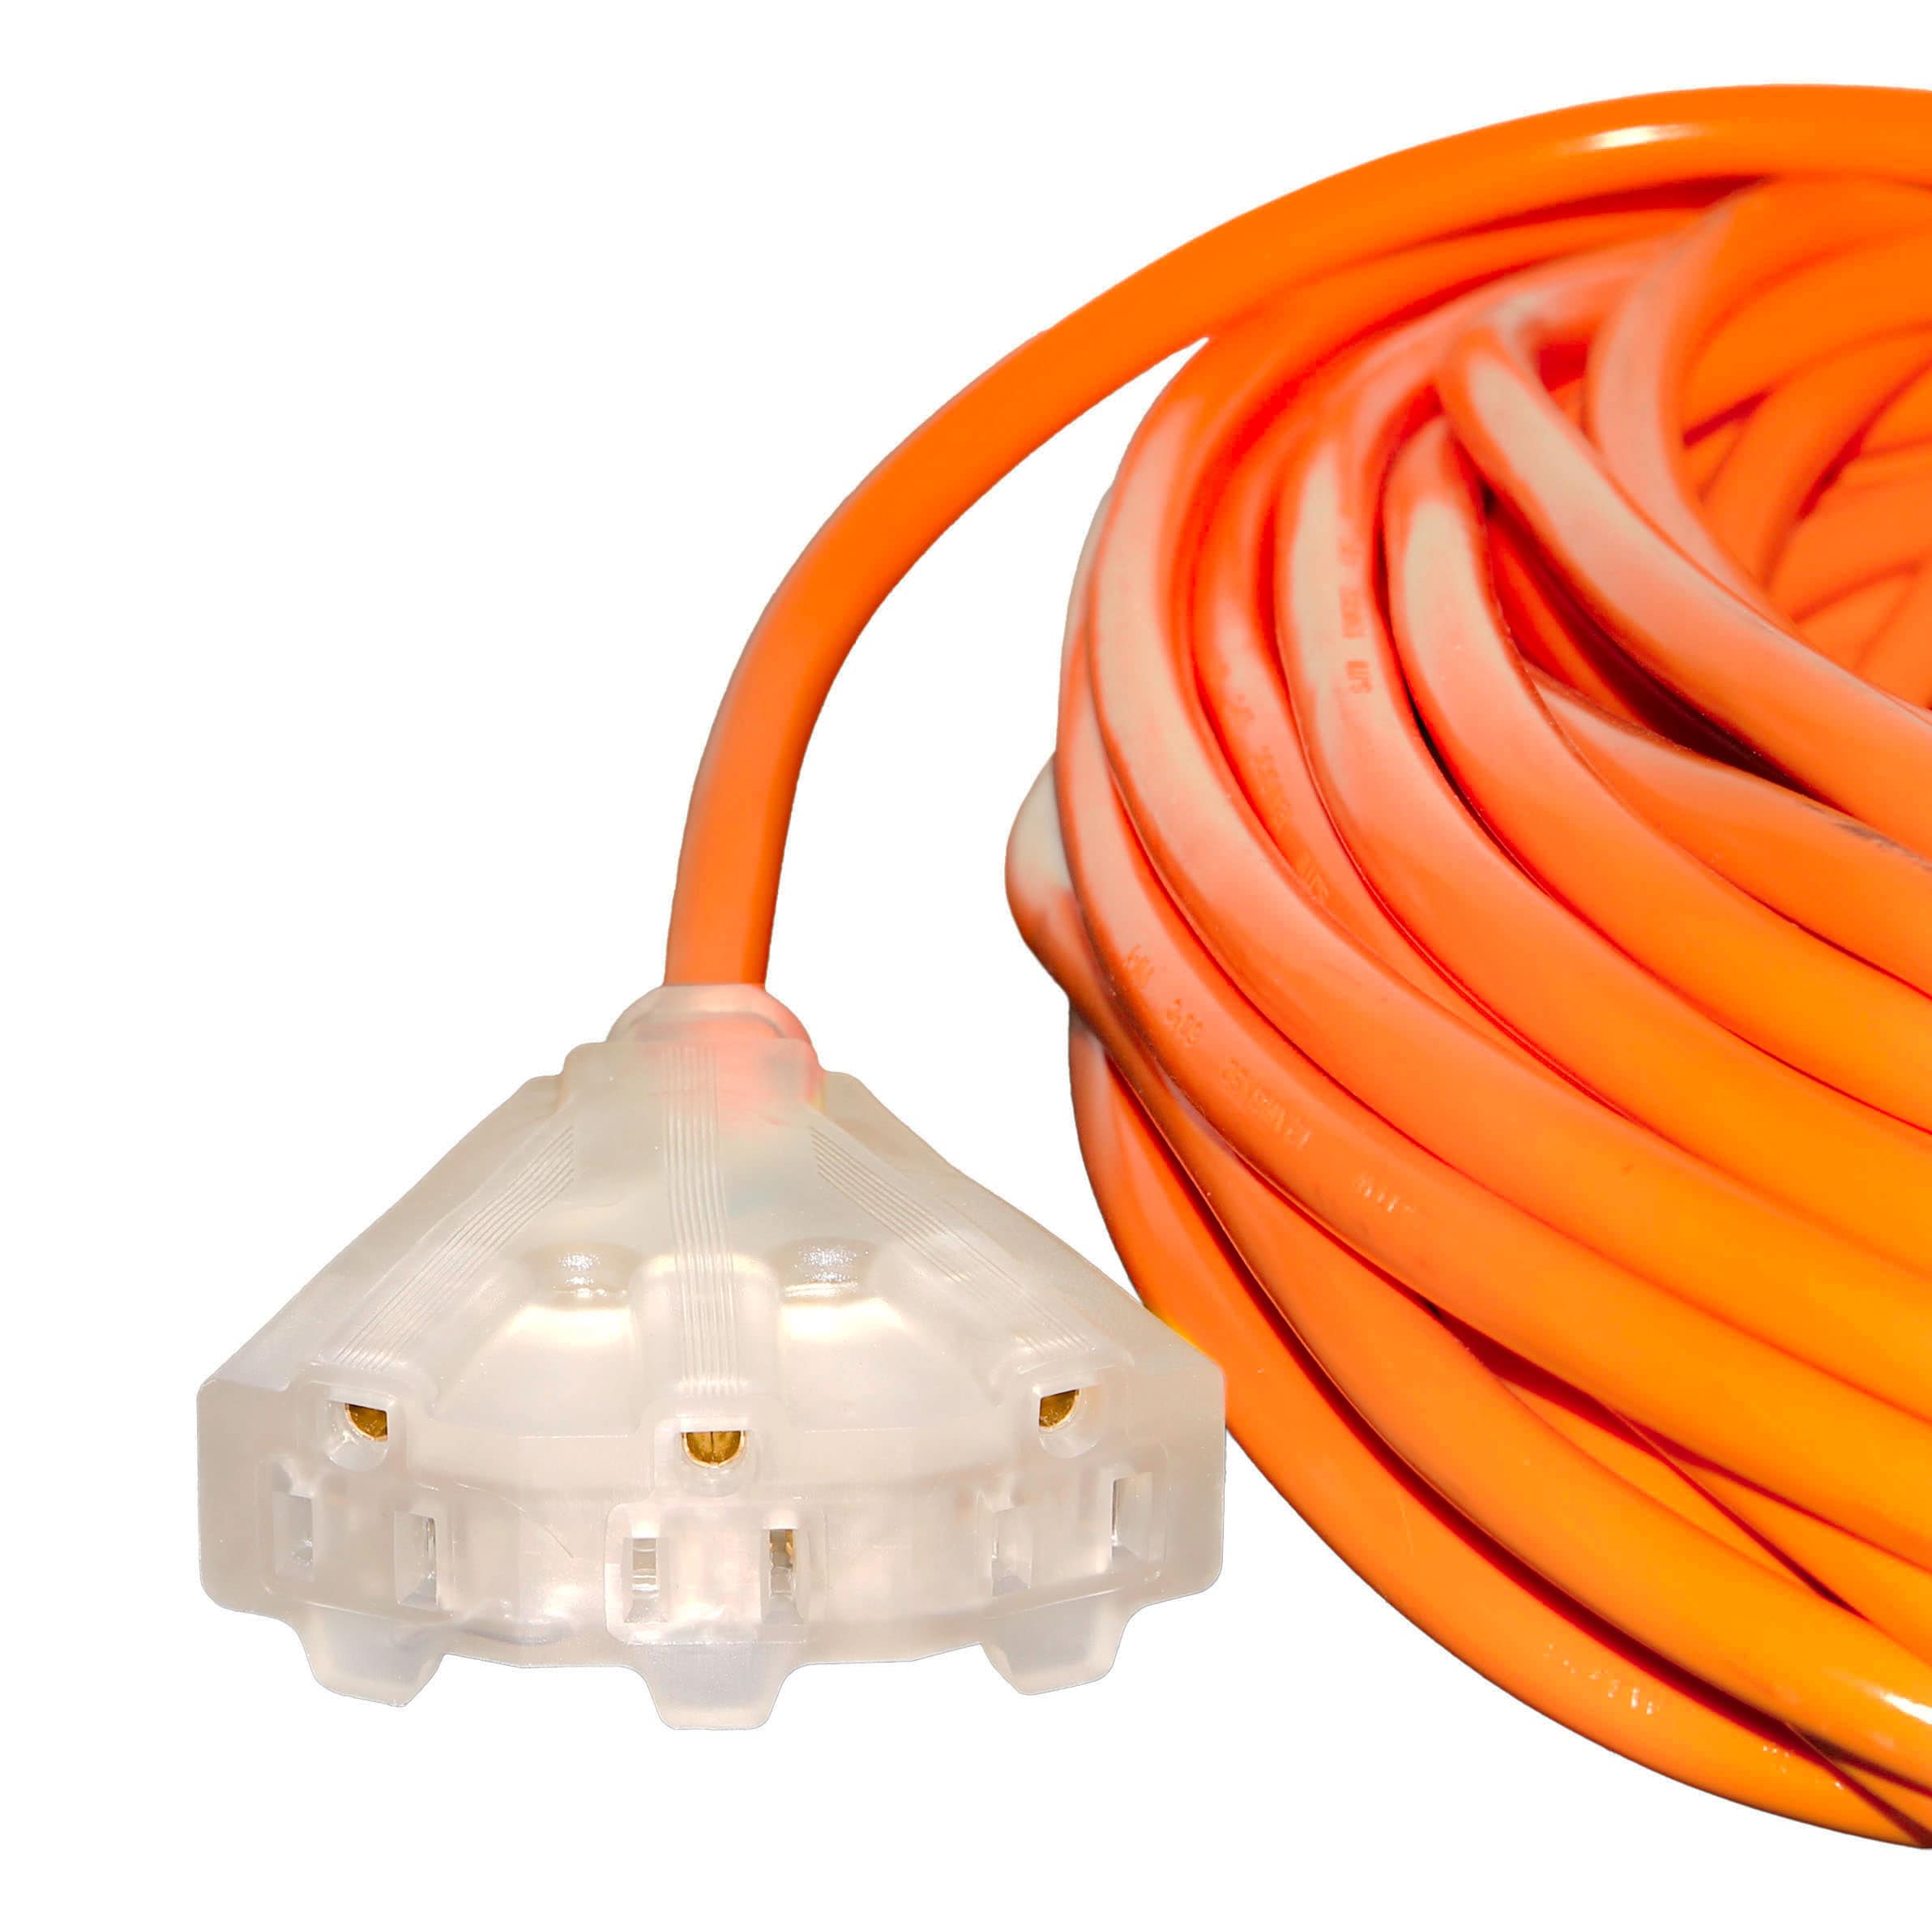 LifeSupplyUSA 100-ft 12 3-Prong Indoor/Outdoor Sjtw Heavy Duty Lighted  Extension Cord in the Extension Cords department at